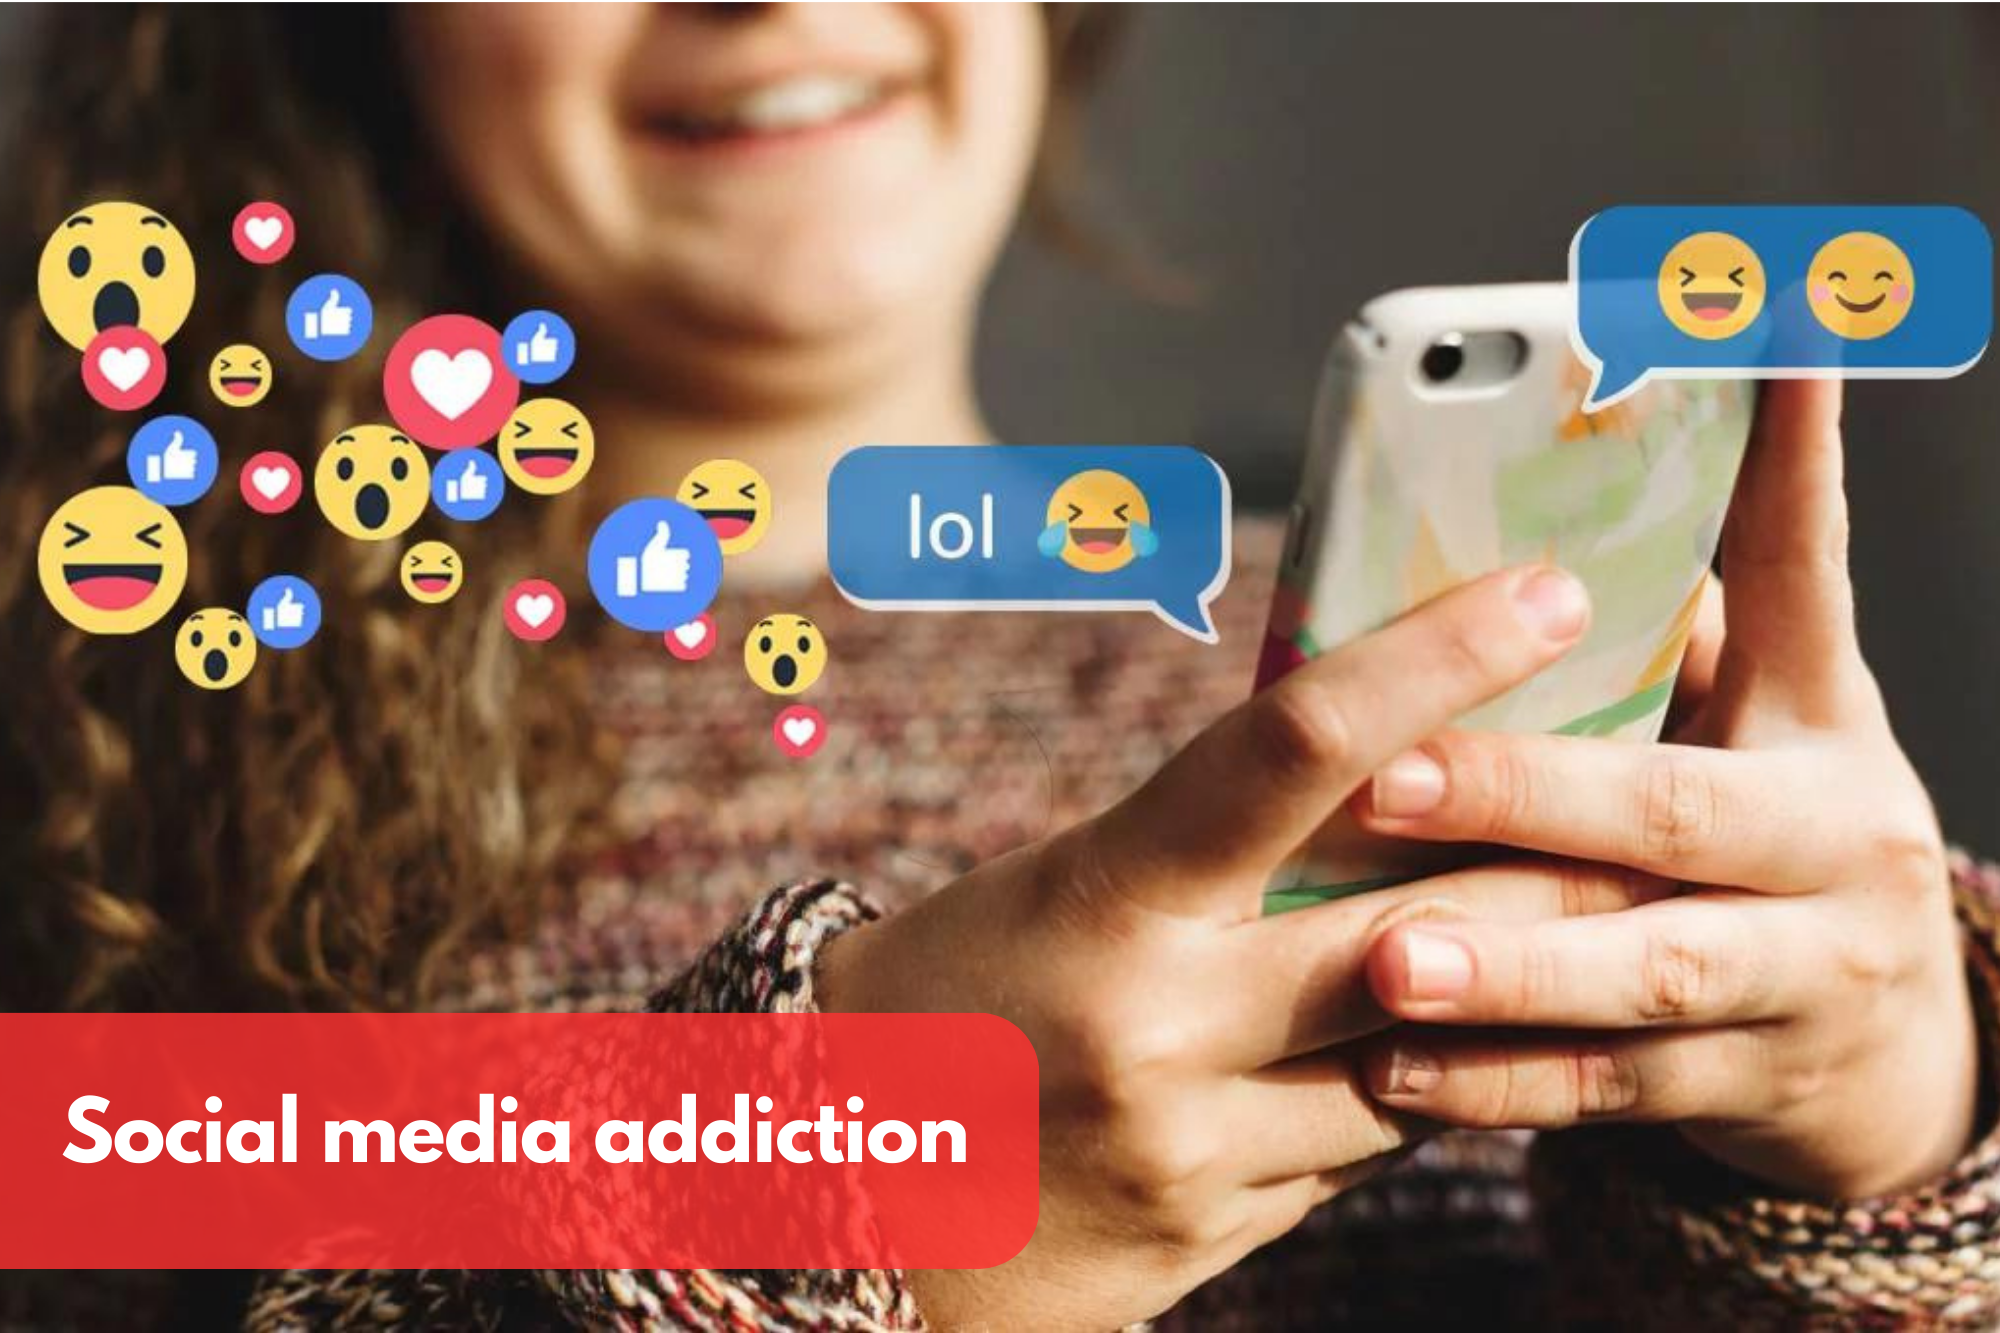 What are the causes of social media addiction